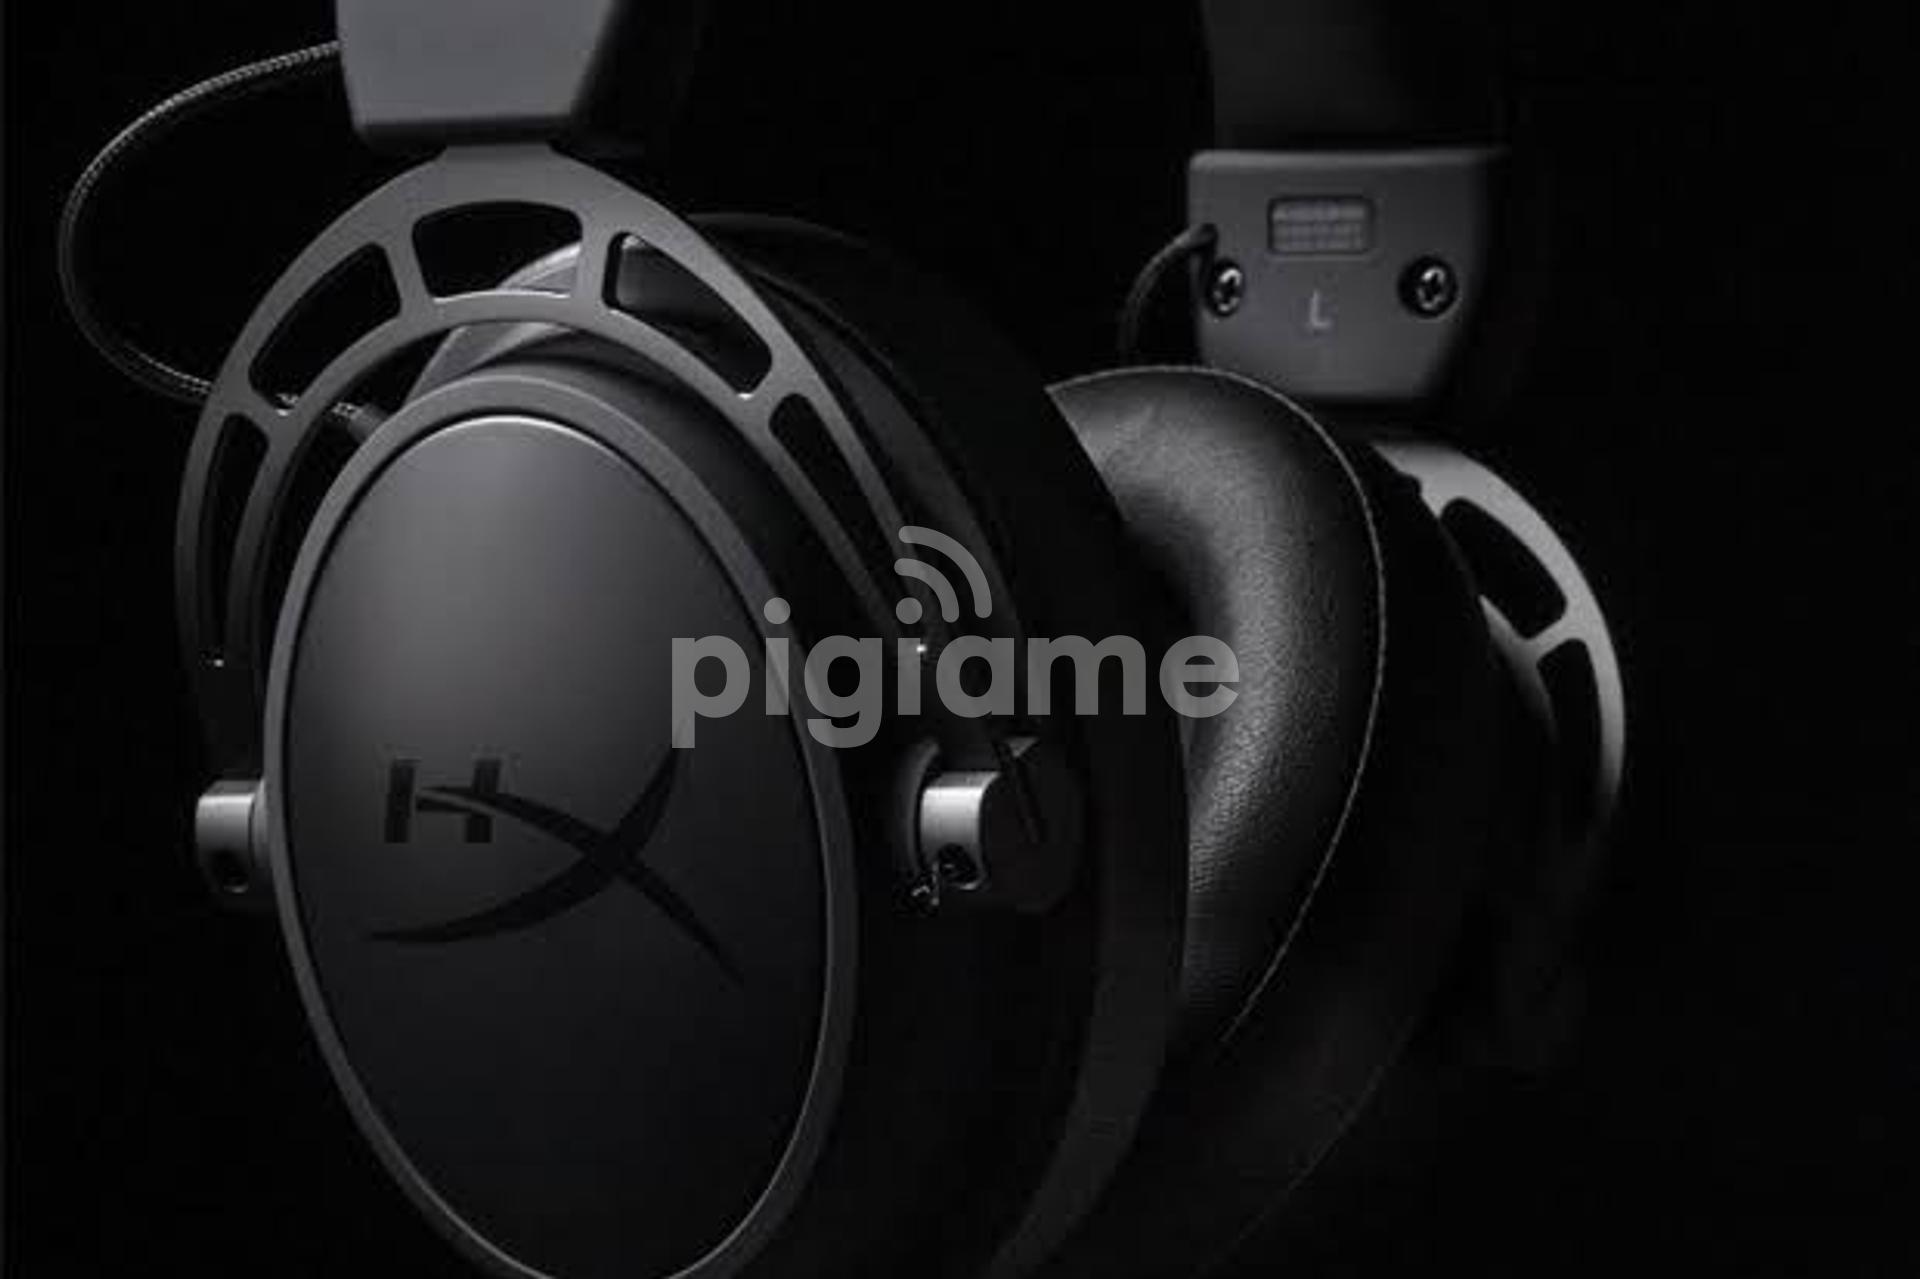 HyperX Cloud Alpha S - PC Gaming Headset, 7.1 Surround Sound, Adjustable  Bass, Dual Chamber Drivers, Chat Mixer, Breathable Leatherette, Memory  Foam